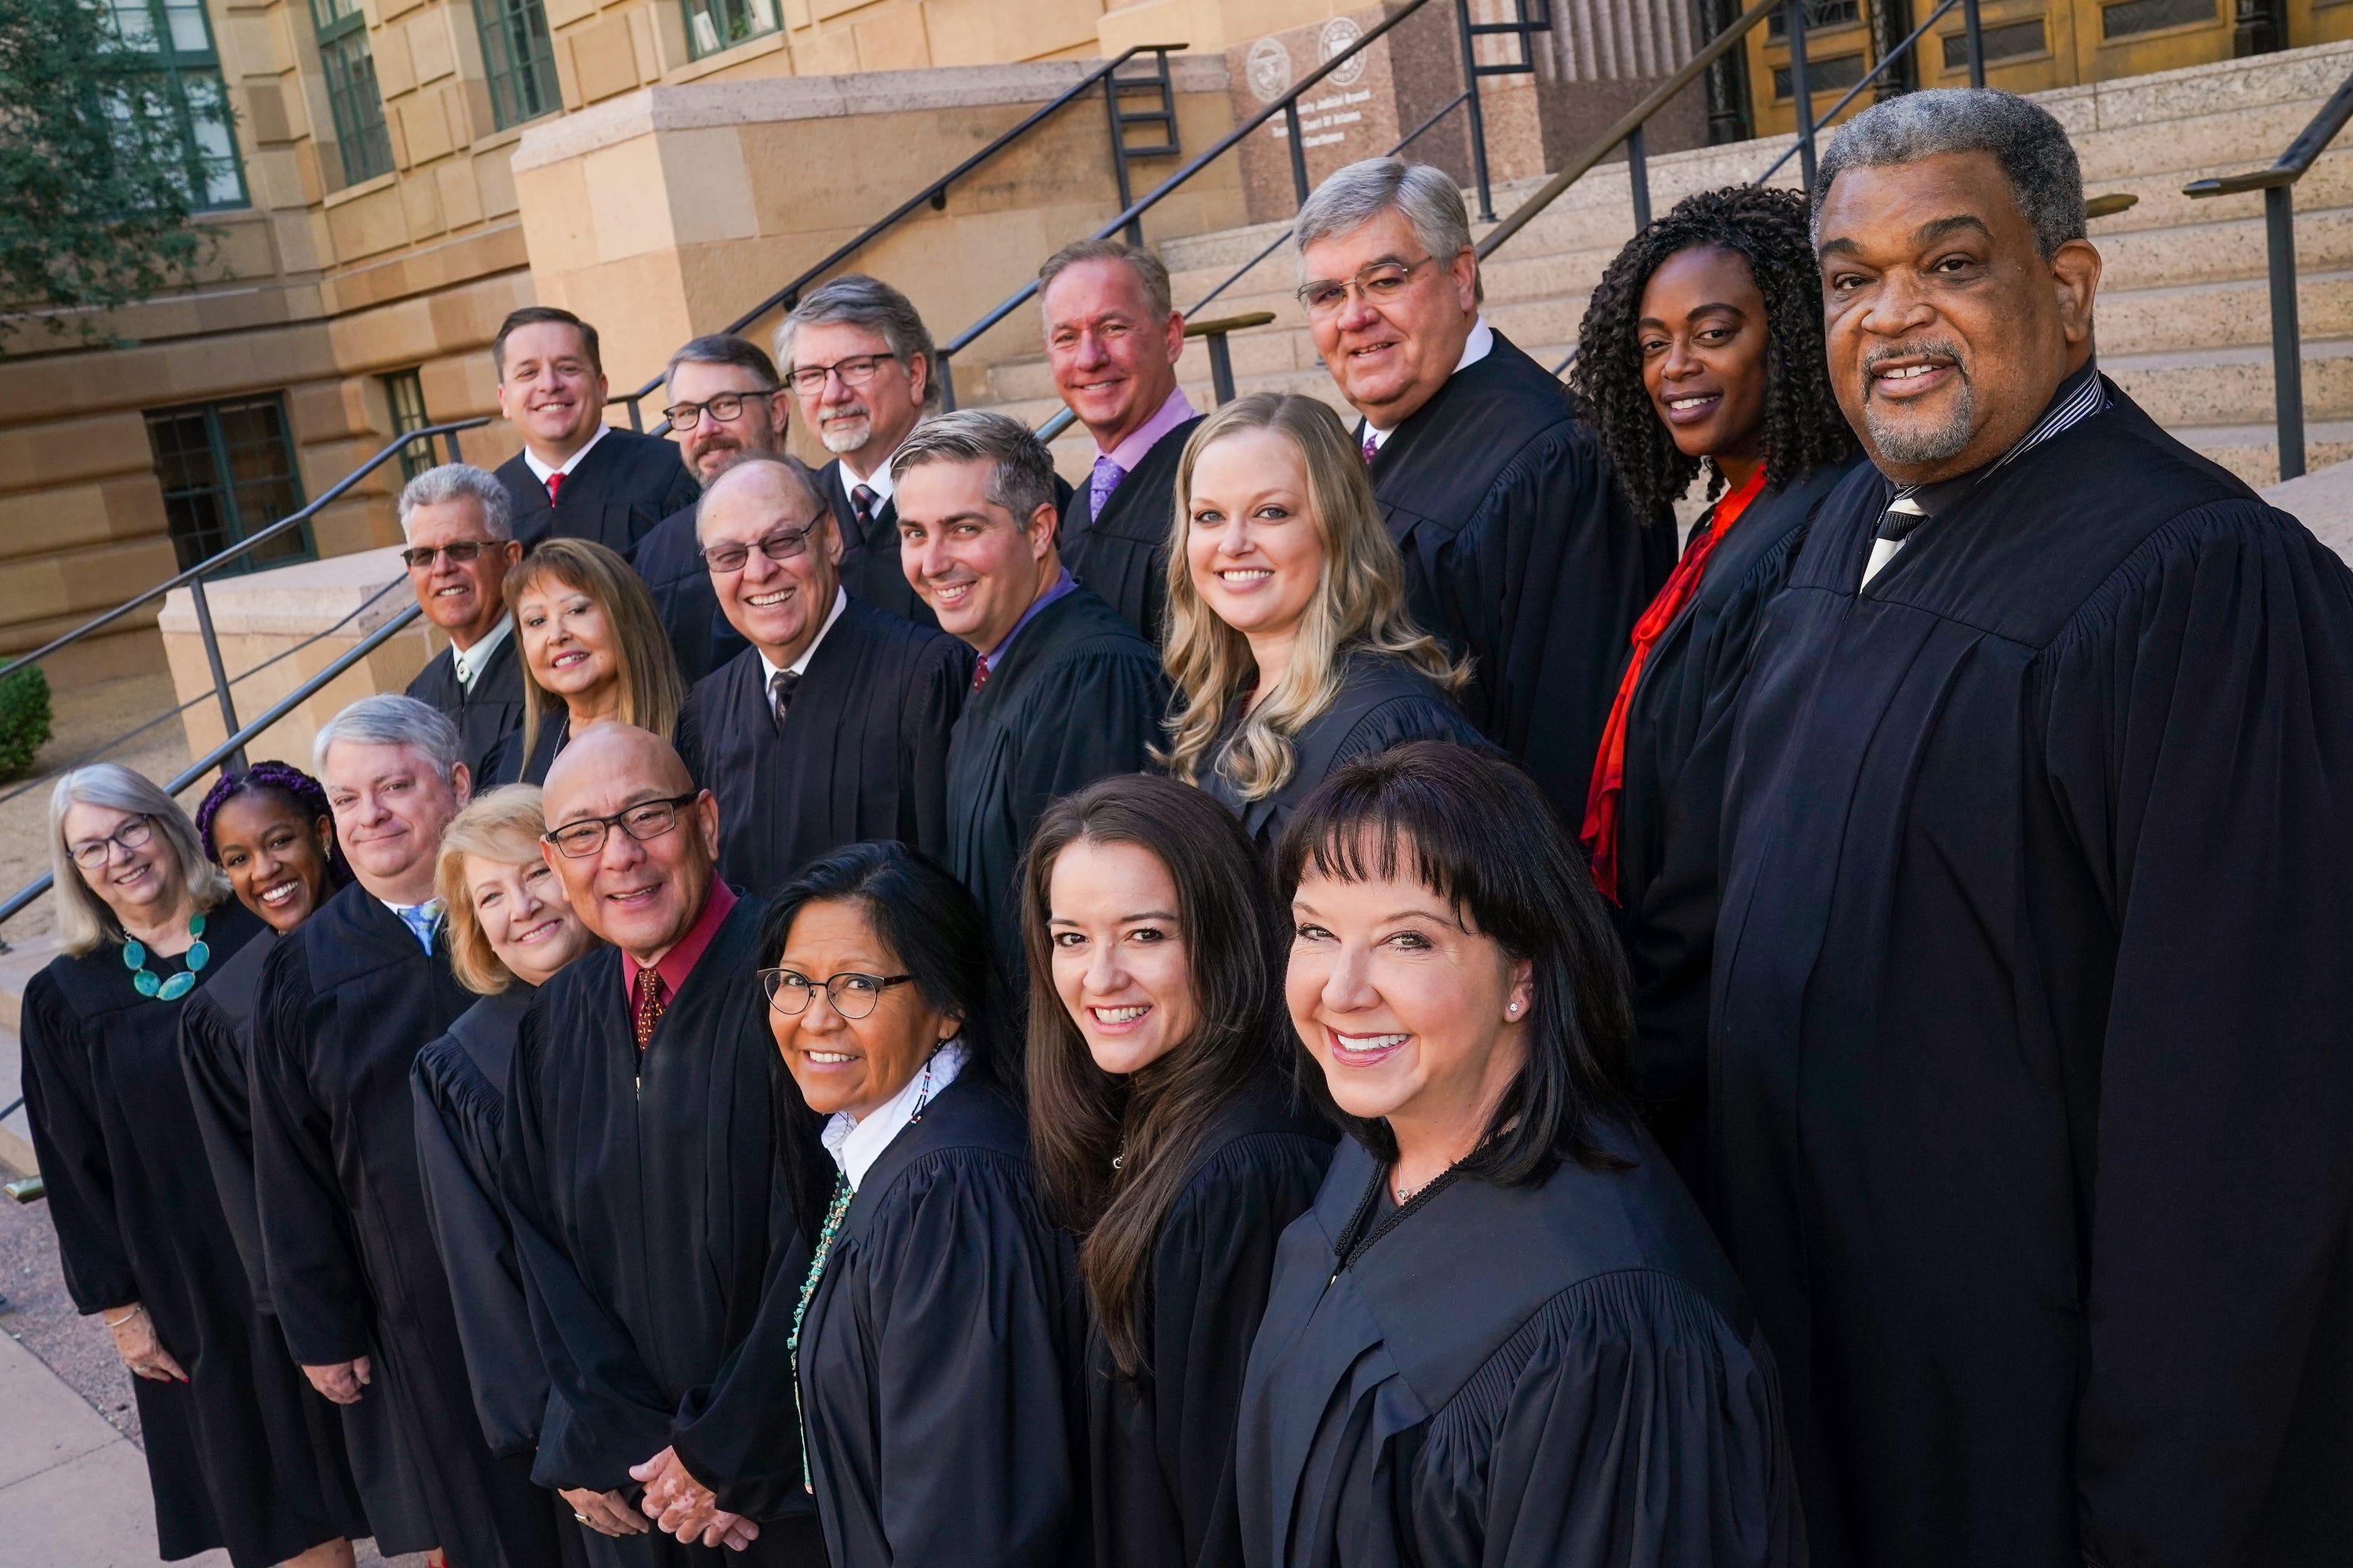 Maricopa County Justice Courts has most diverse bench of judges ever